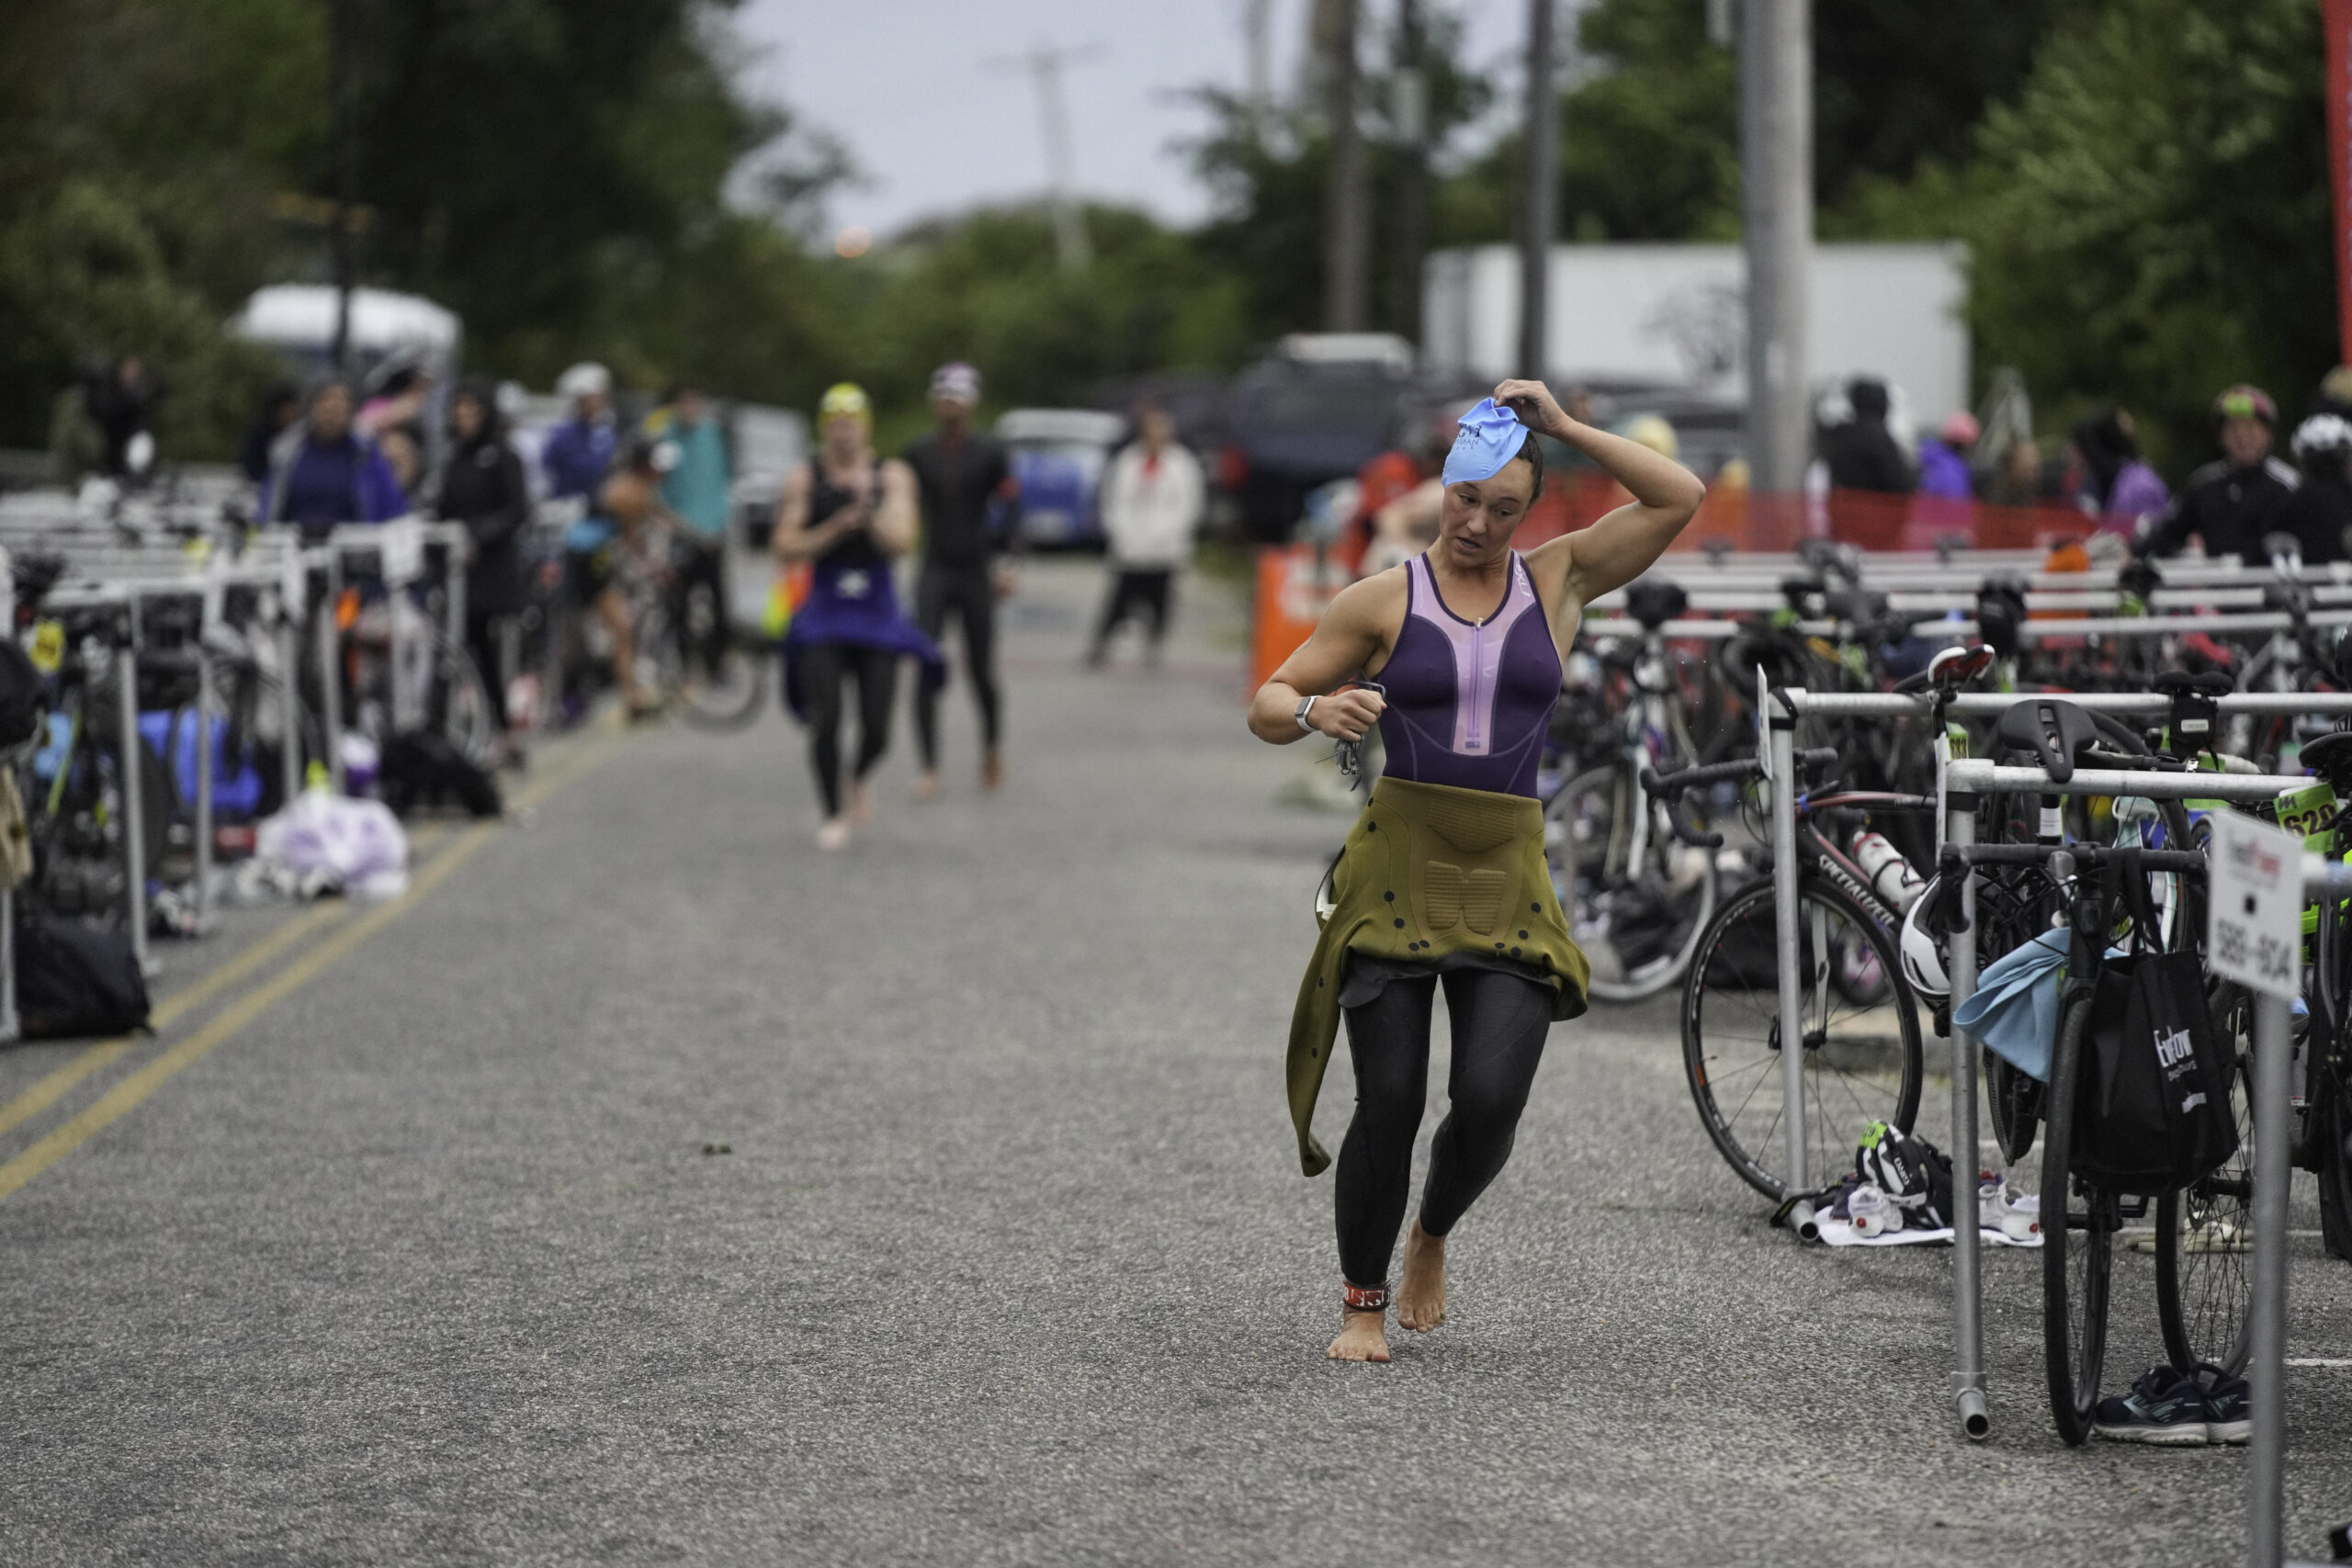 Michelle Wootton out of the water and transition to the next phase of the race.    RON ESPOSITO